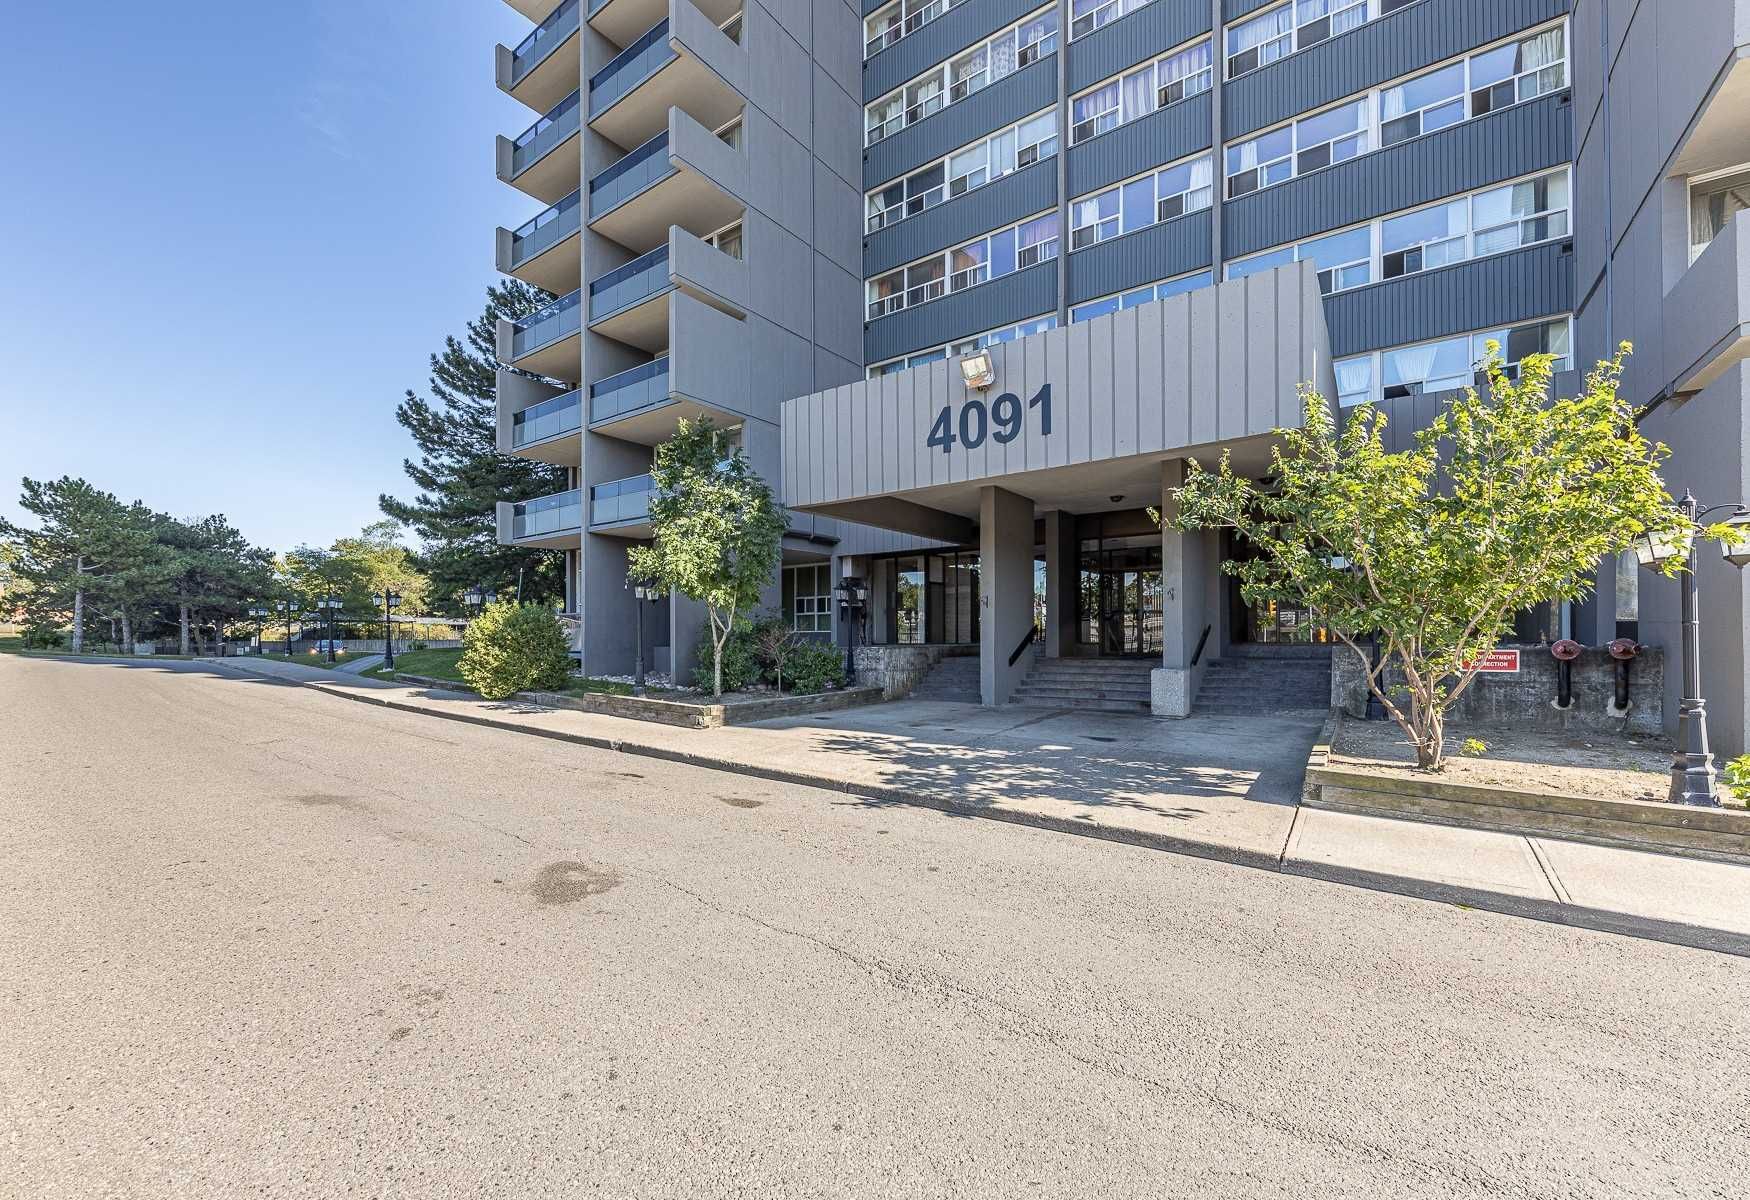 4101 Sheppard Ave E. This condo at 4091-4101 Sheppard Avenue East Condos is located in  Scarborough, Toronto - image #2 of 2 by Strata.ca